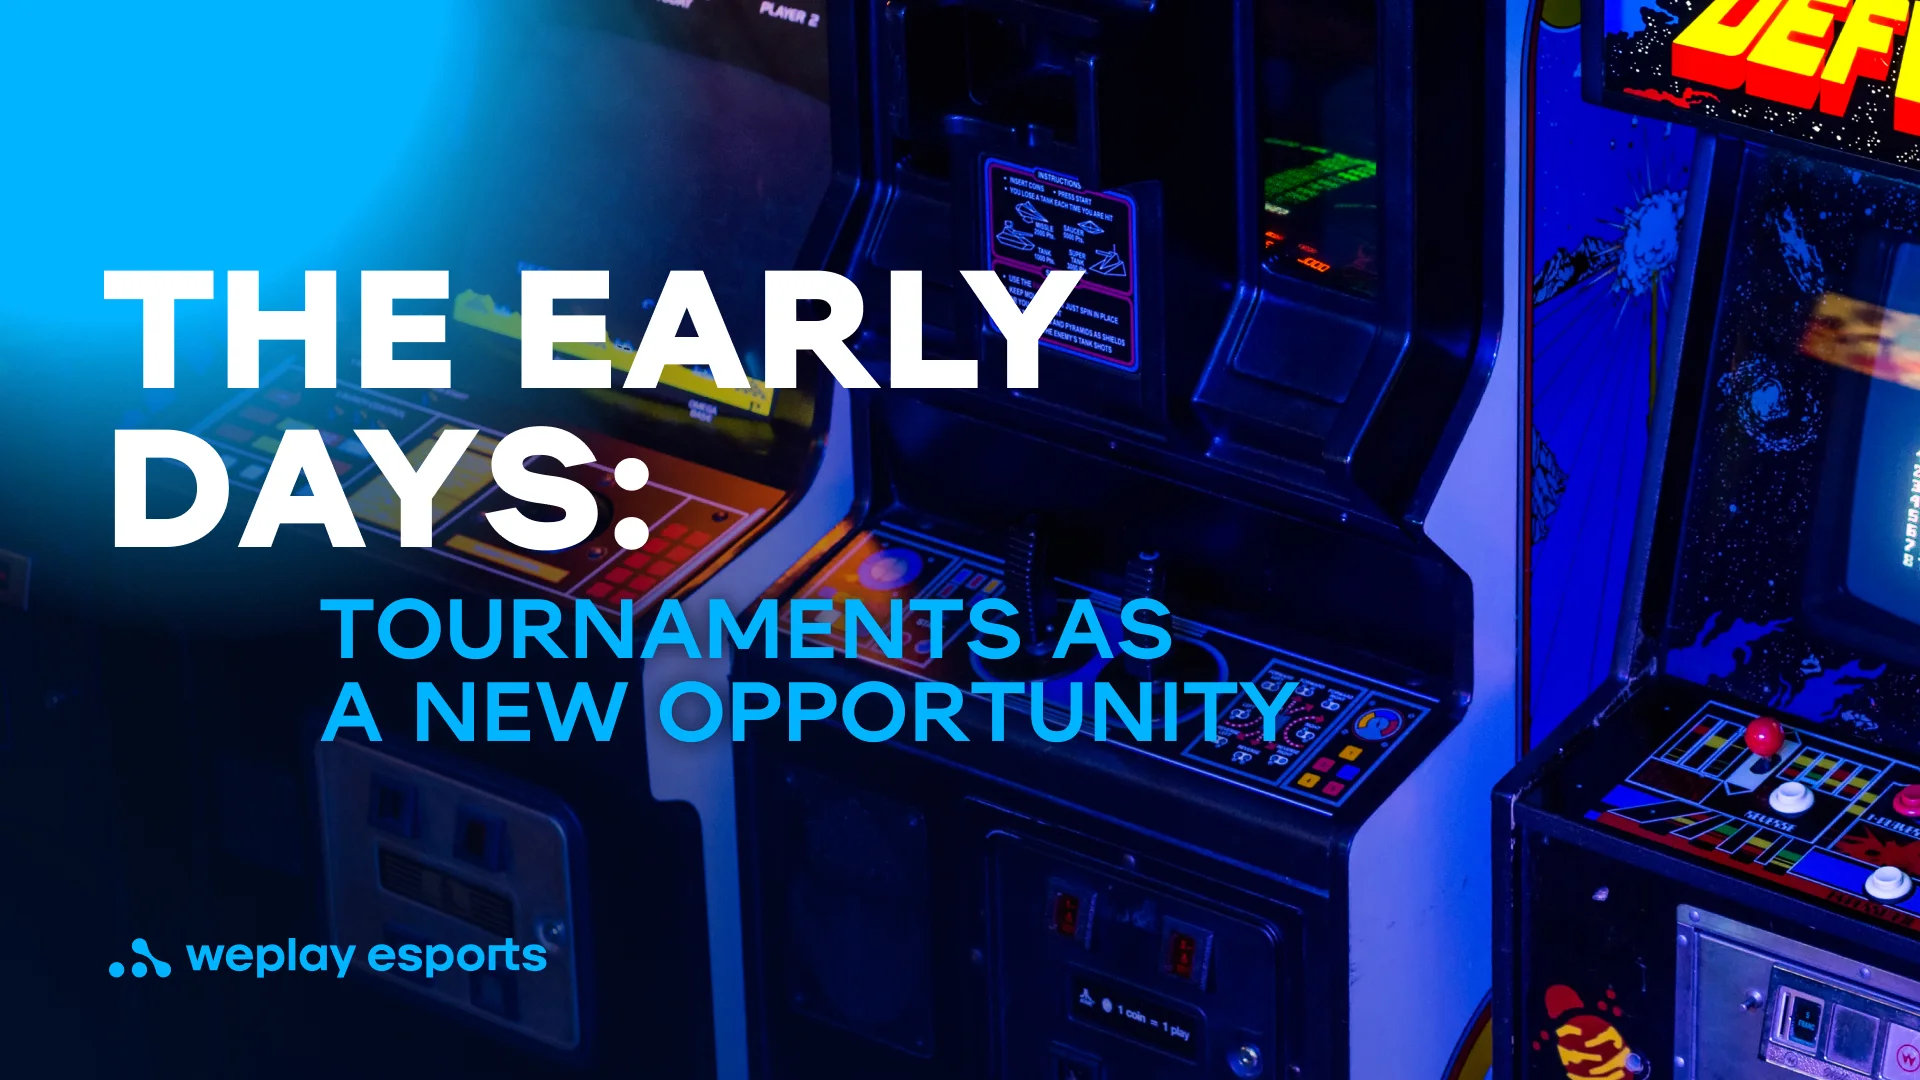 The early days: tournaments as a new opportunity. Credit: WePlay Holding